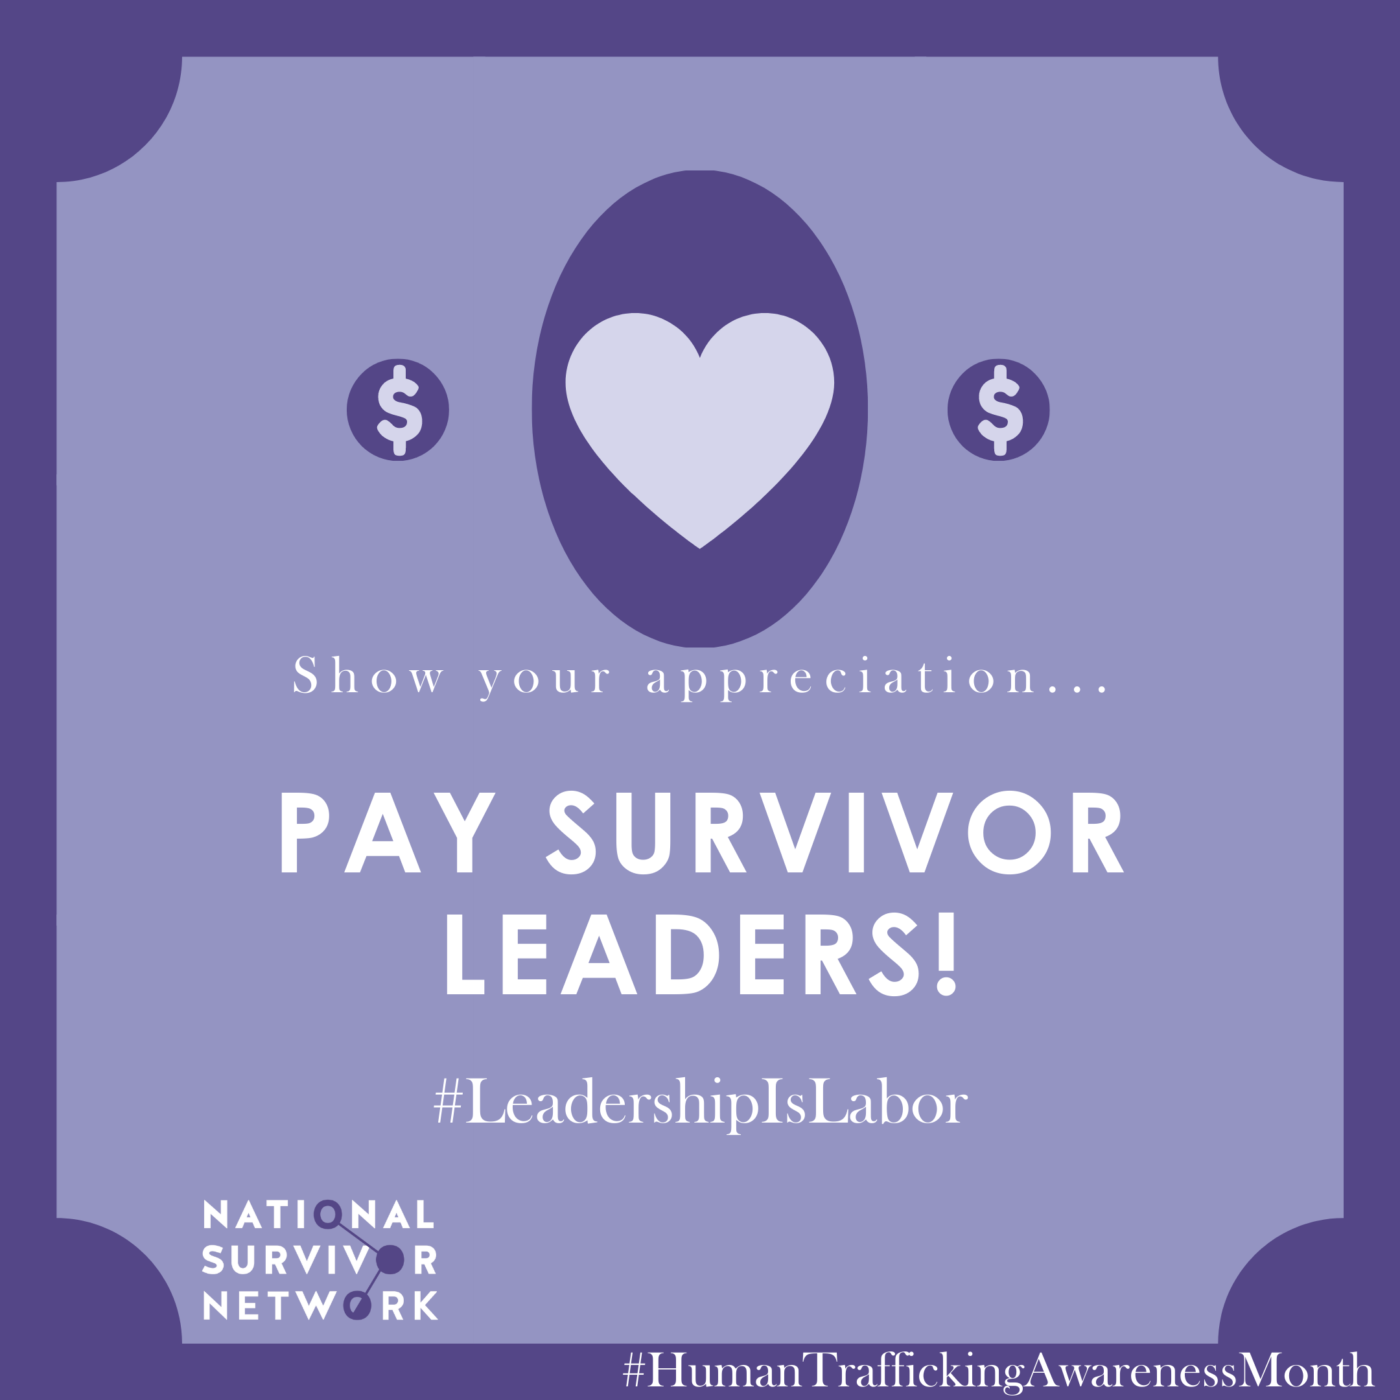 Square image with NSN logo that includes Human Trafficking Awareness Month hashtags. Text says "Show your appreciation... Pay survivor leaders! #LeadershipIsLabor". Hearts and dollar signs decorate the image.